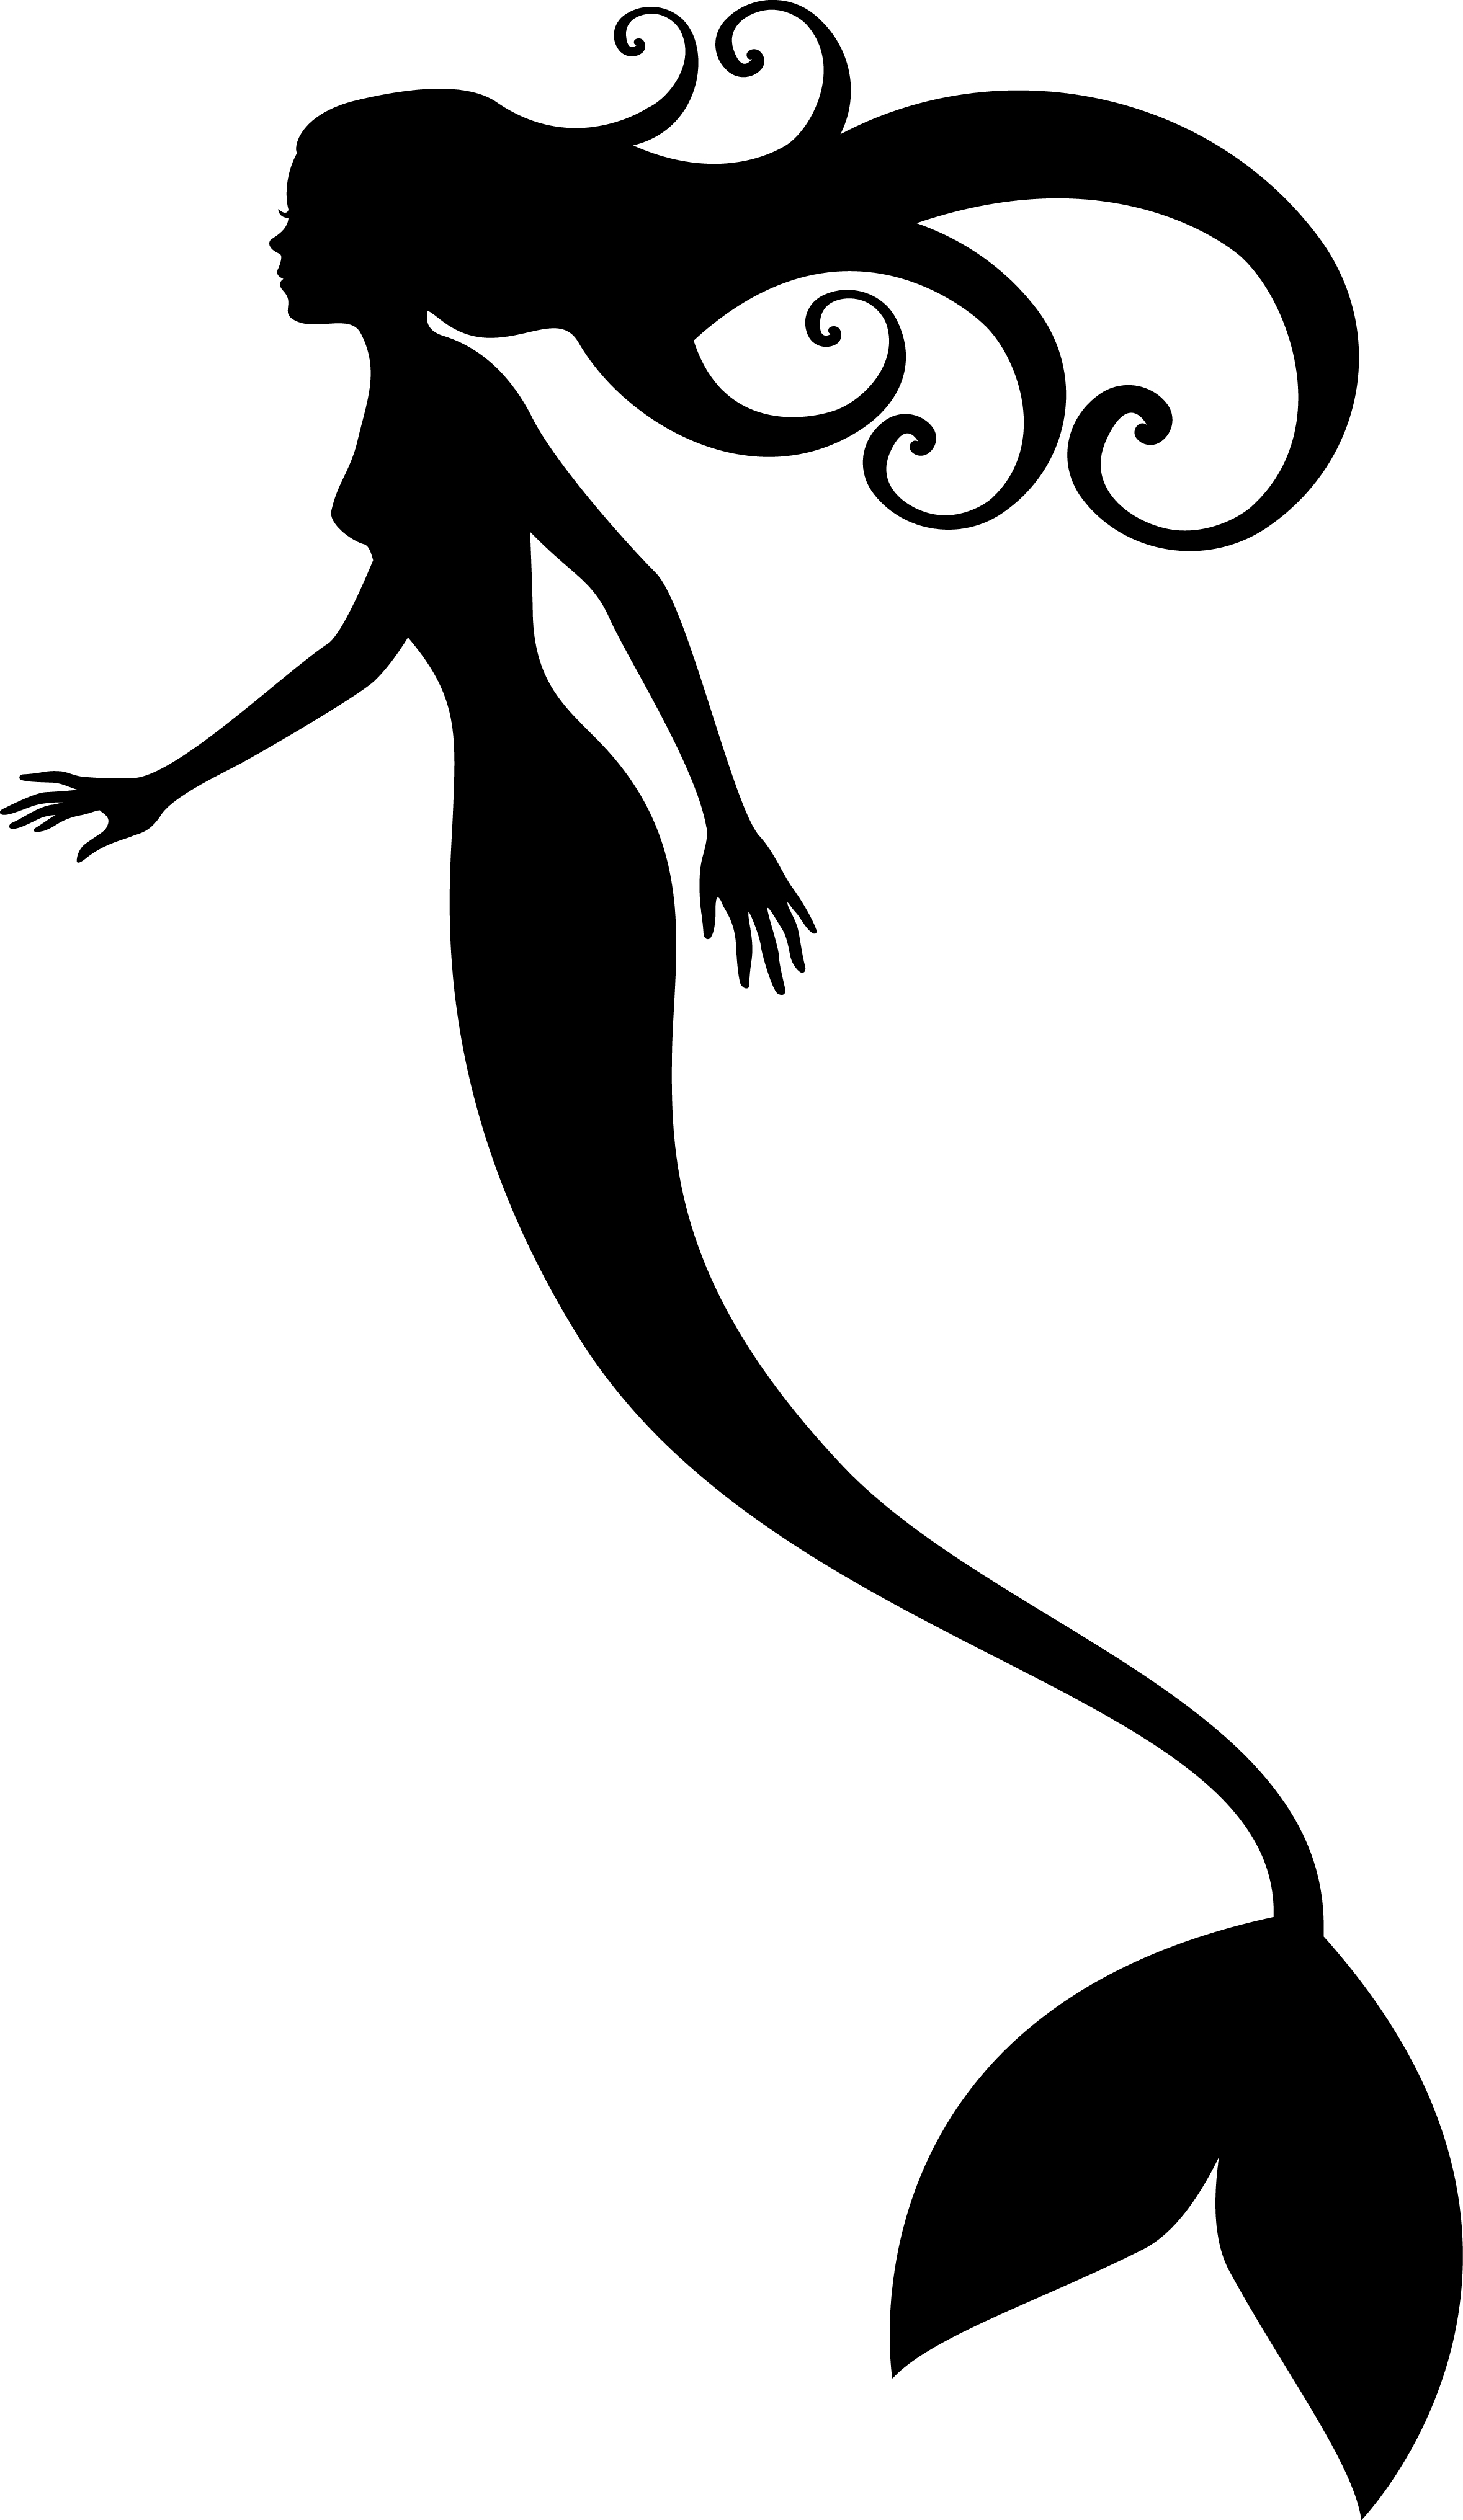 Mermaid tail clipart black and white 